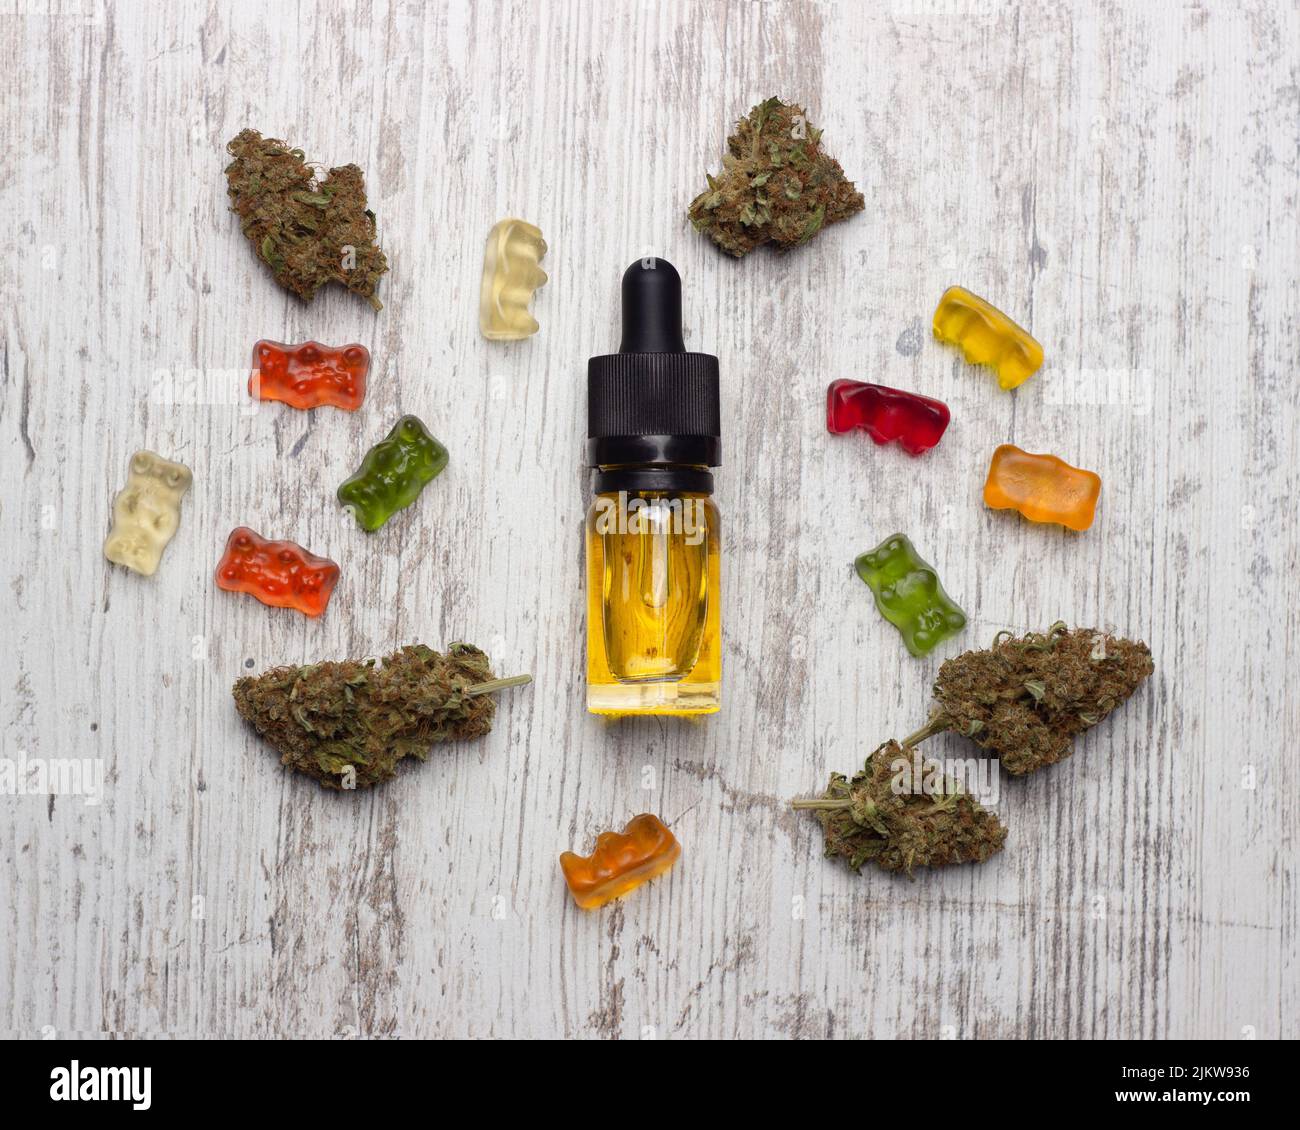 A glass bottle with yellow cannabis cbd oil lies on a wooden table surrounded by dry medical marijuana buds and colorful cbd gummy bears Stock Photo